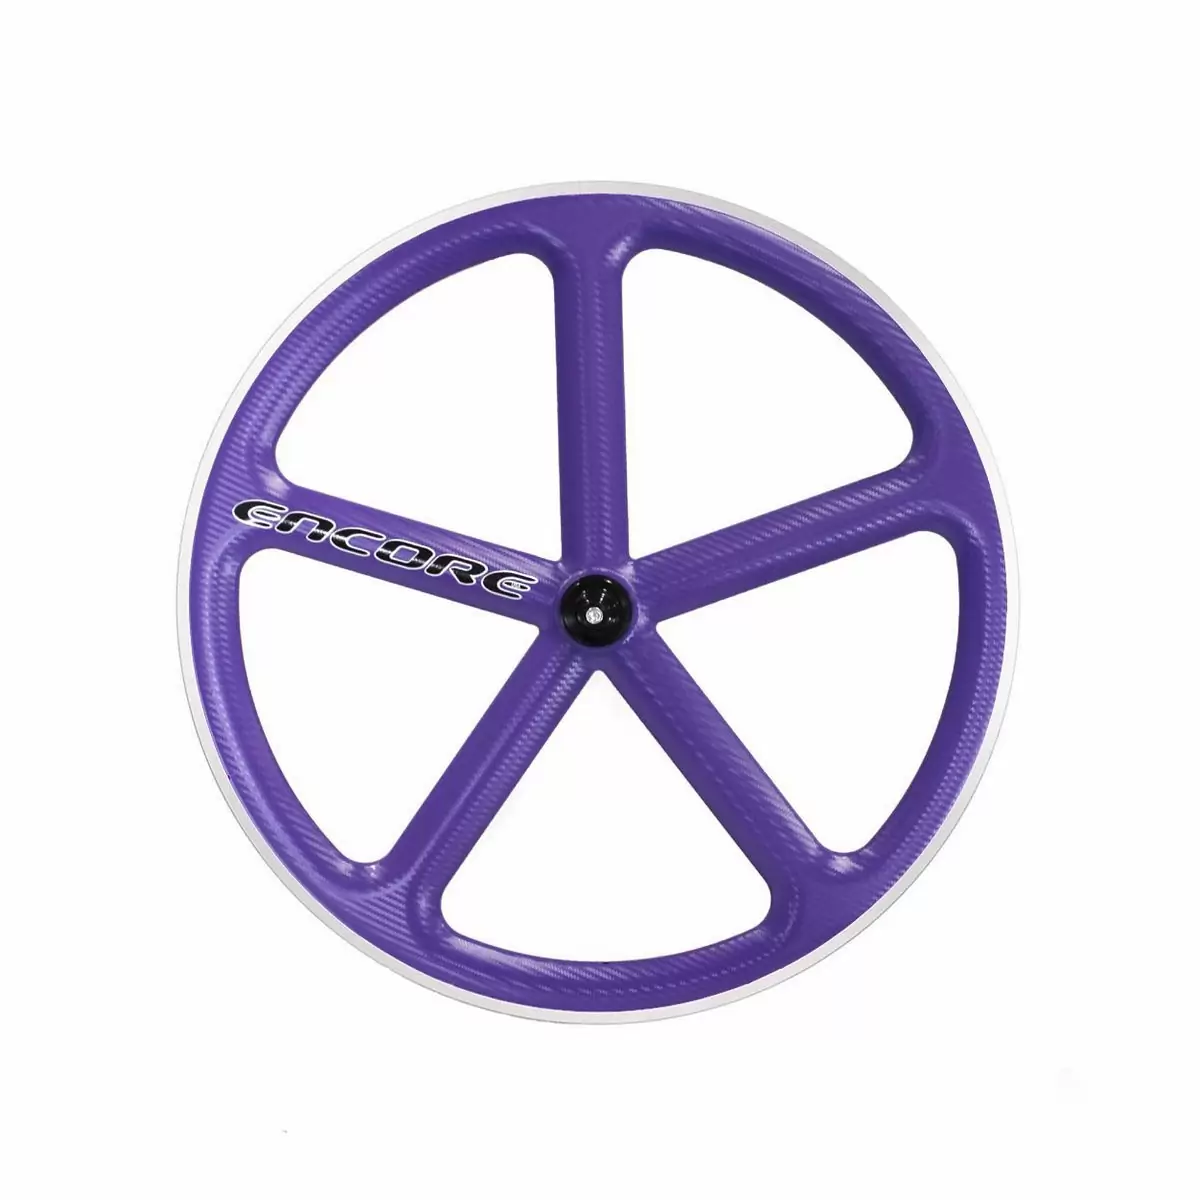 roue arrière 700c track 5 rayons carbone tissage violet msw - image